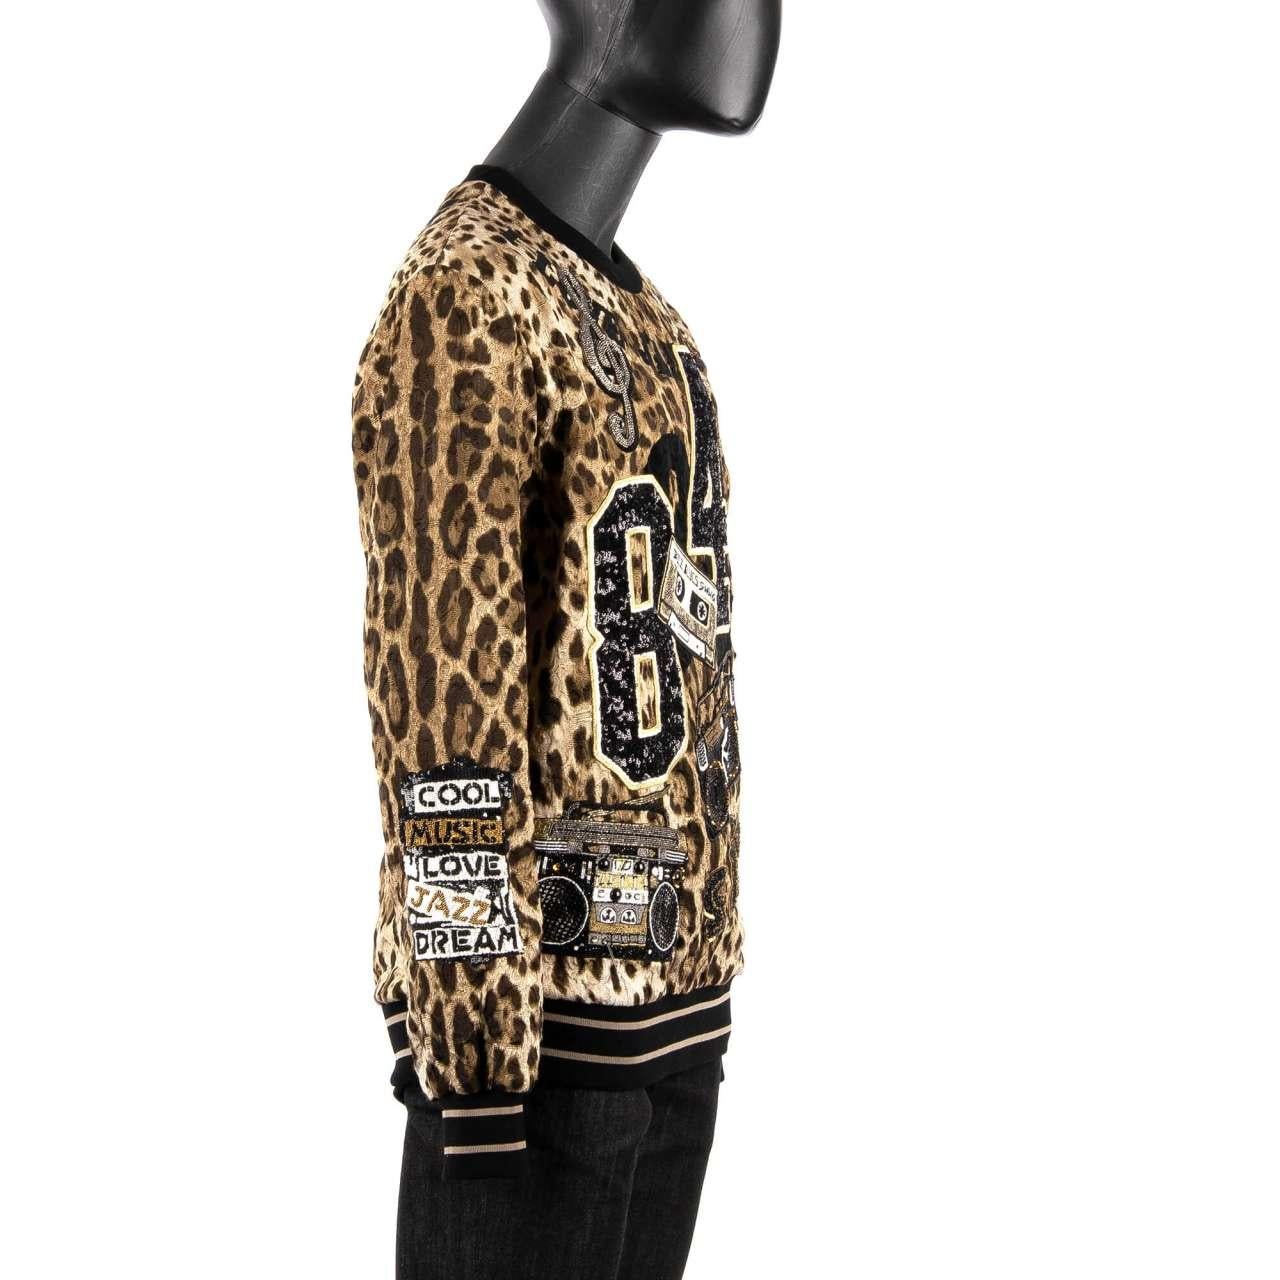 Men's D&G Leopard Printed Sweater with Jazz Samba Music Embroidery Black Brown 46 For Sale